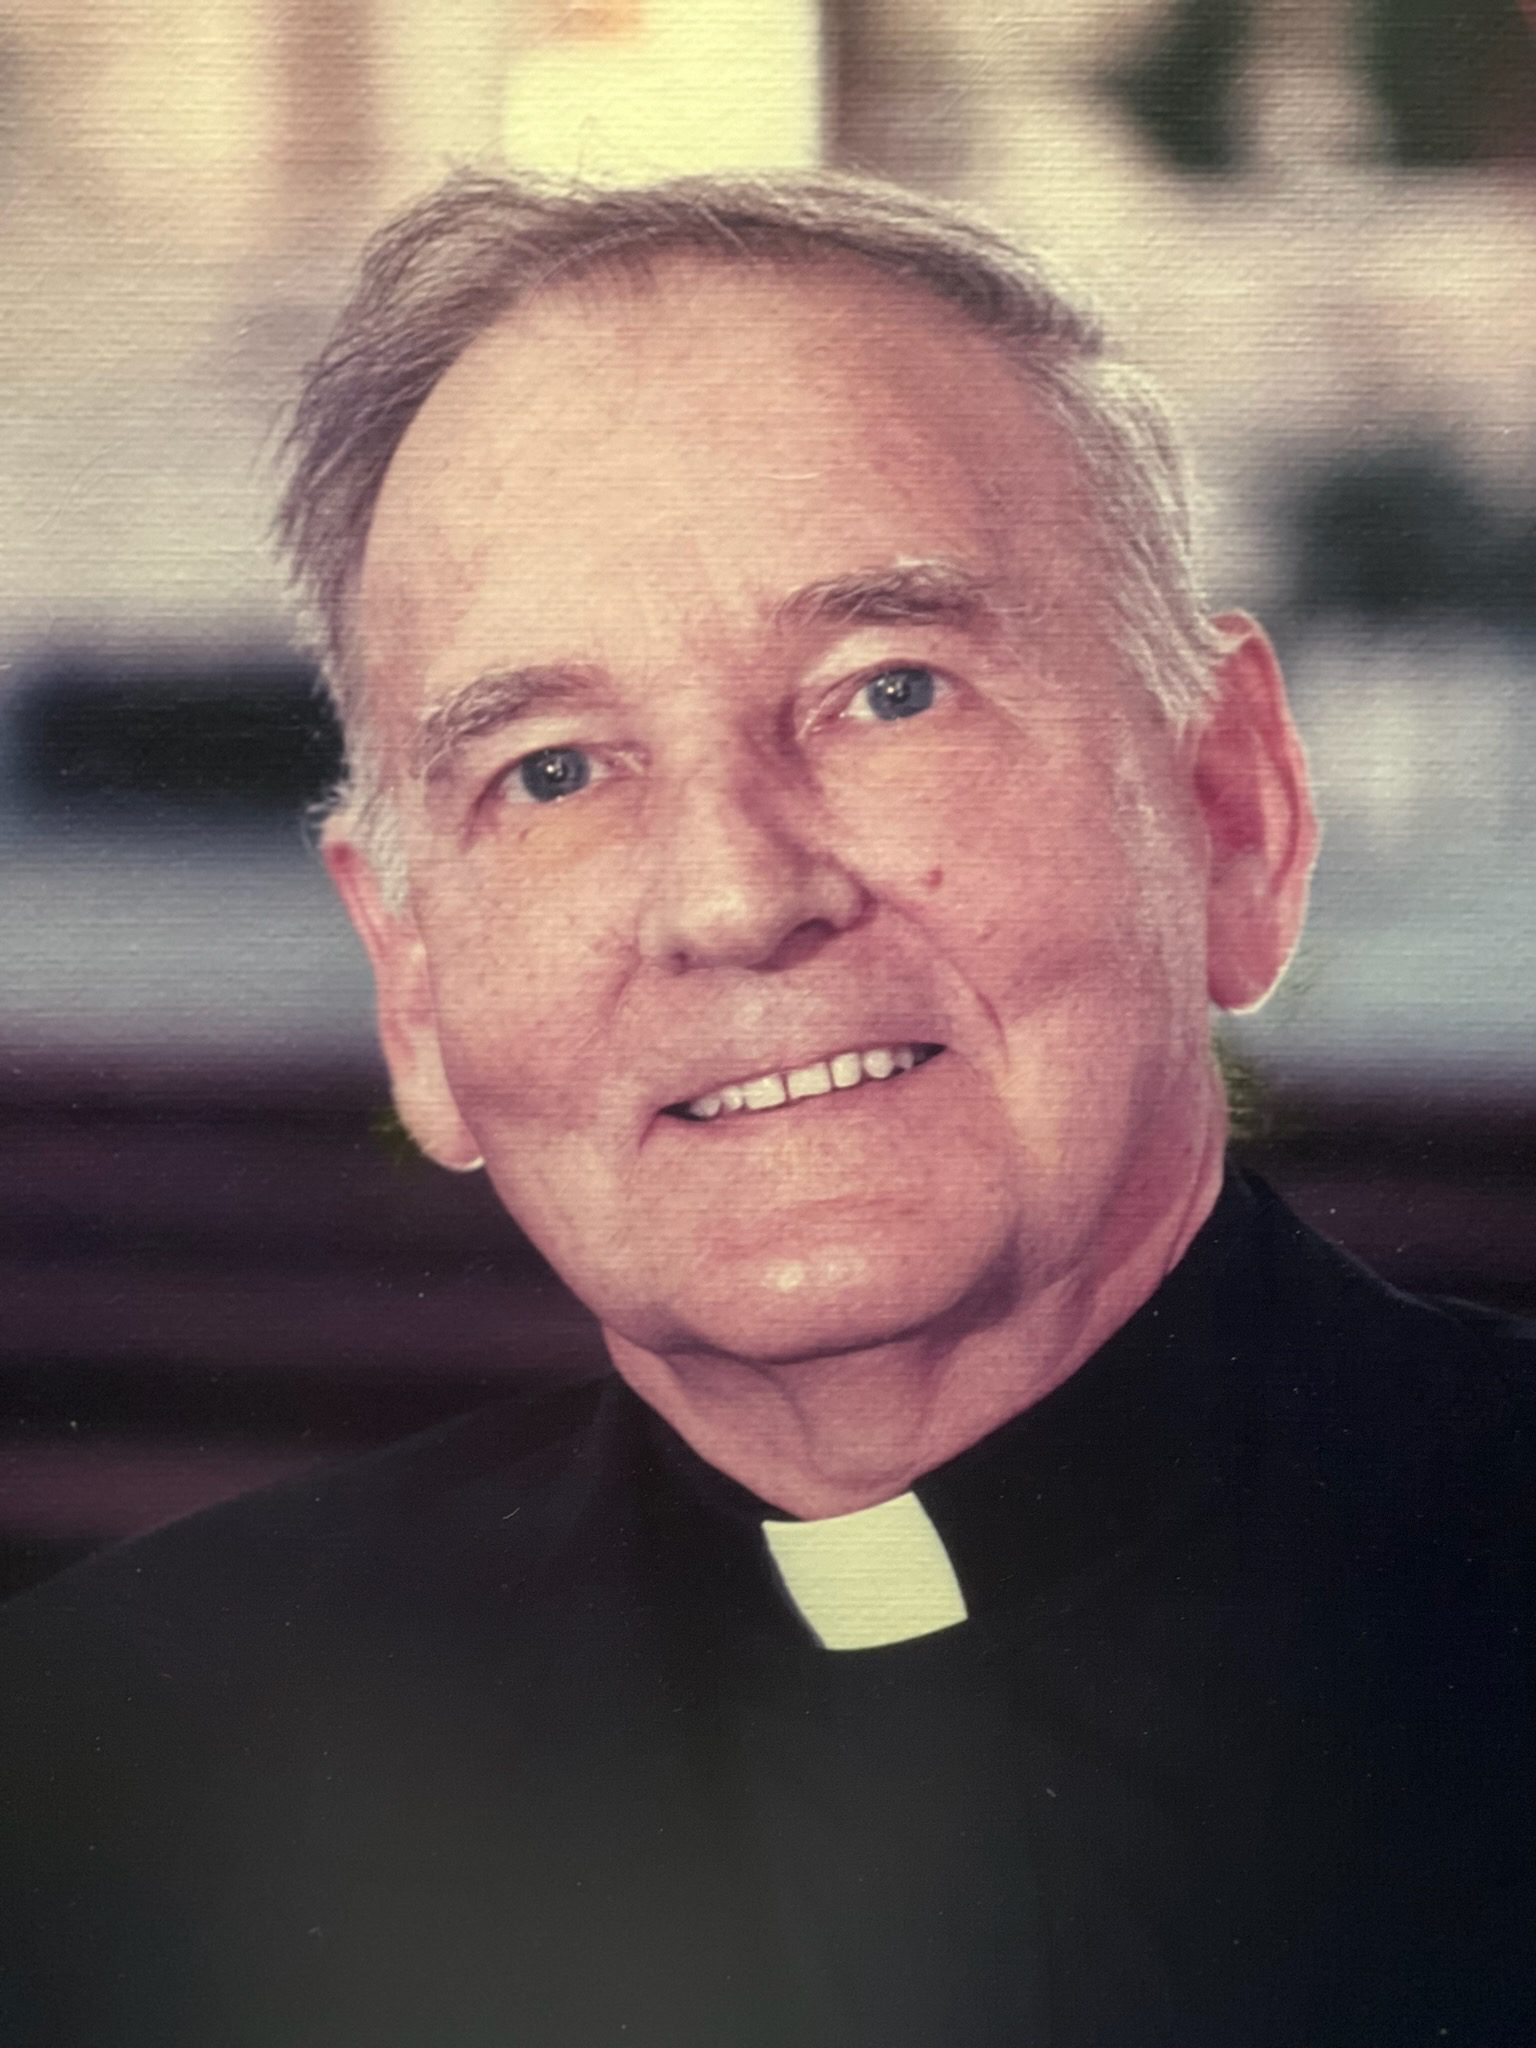 Retired Pastor from Cape Coral dies - Diocese of Venice